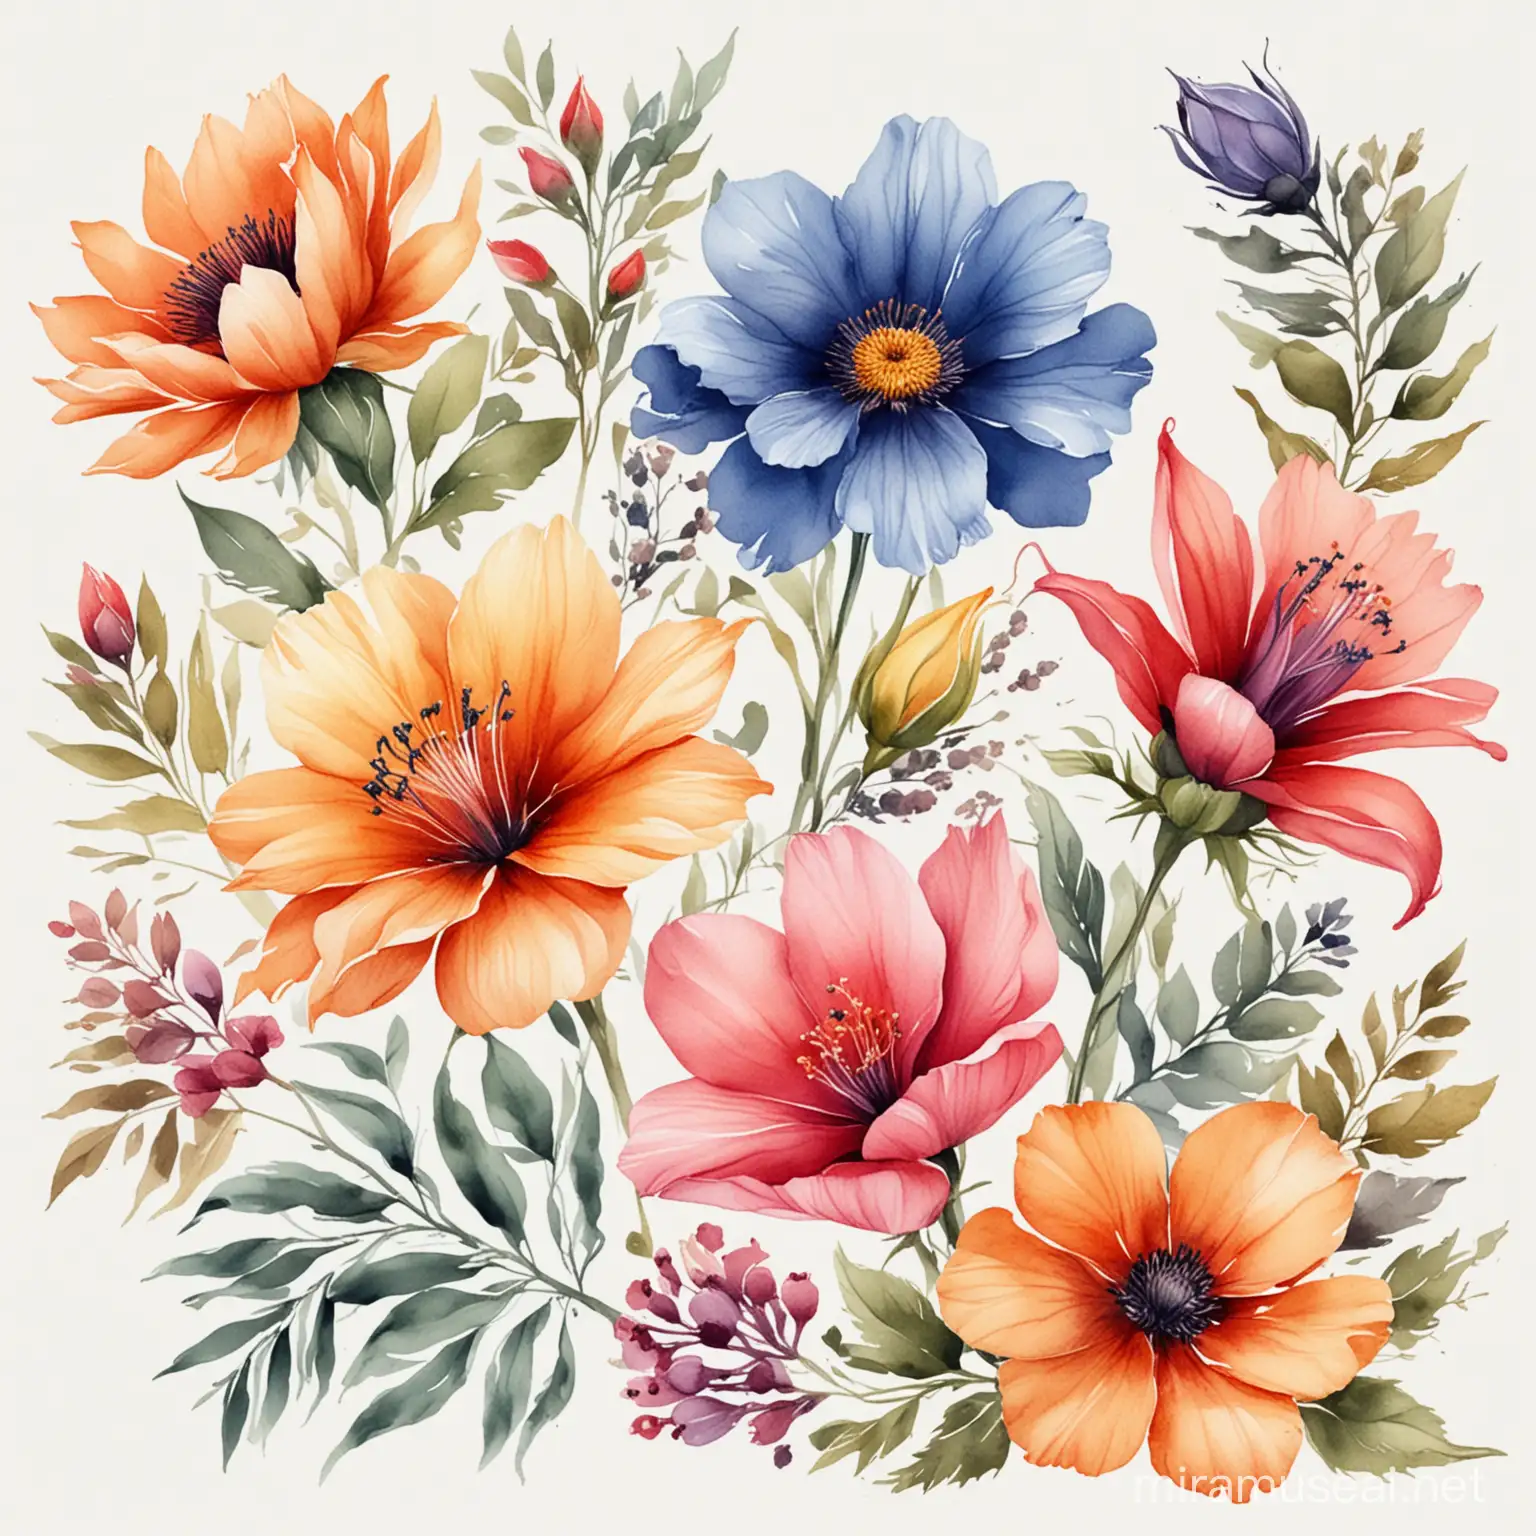 Vibrant Watercolor Flowers Realistic Botanical Art on White Background